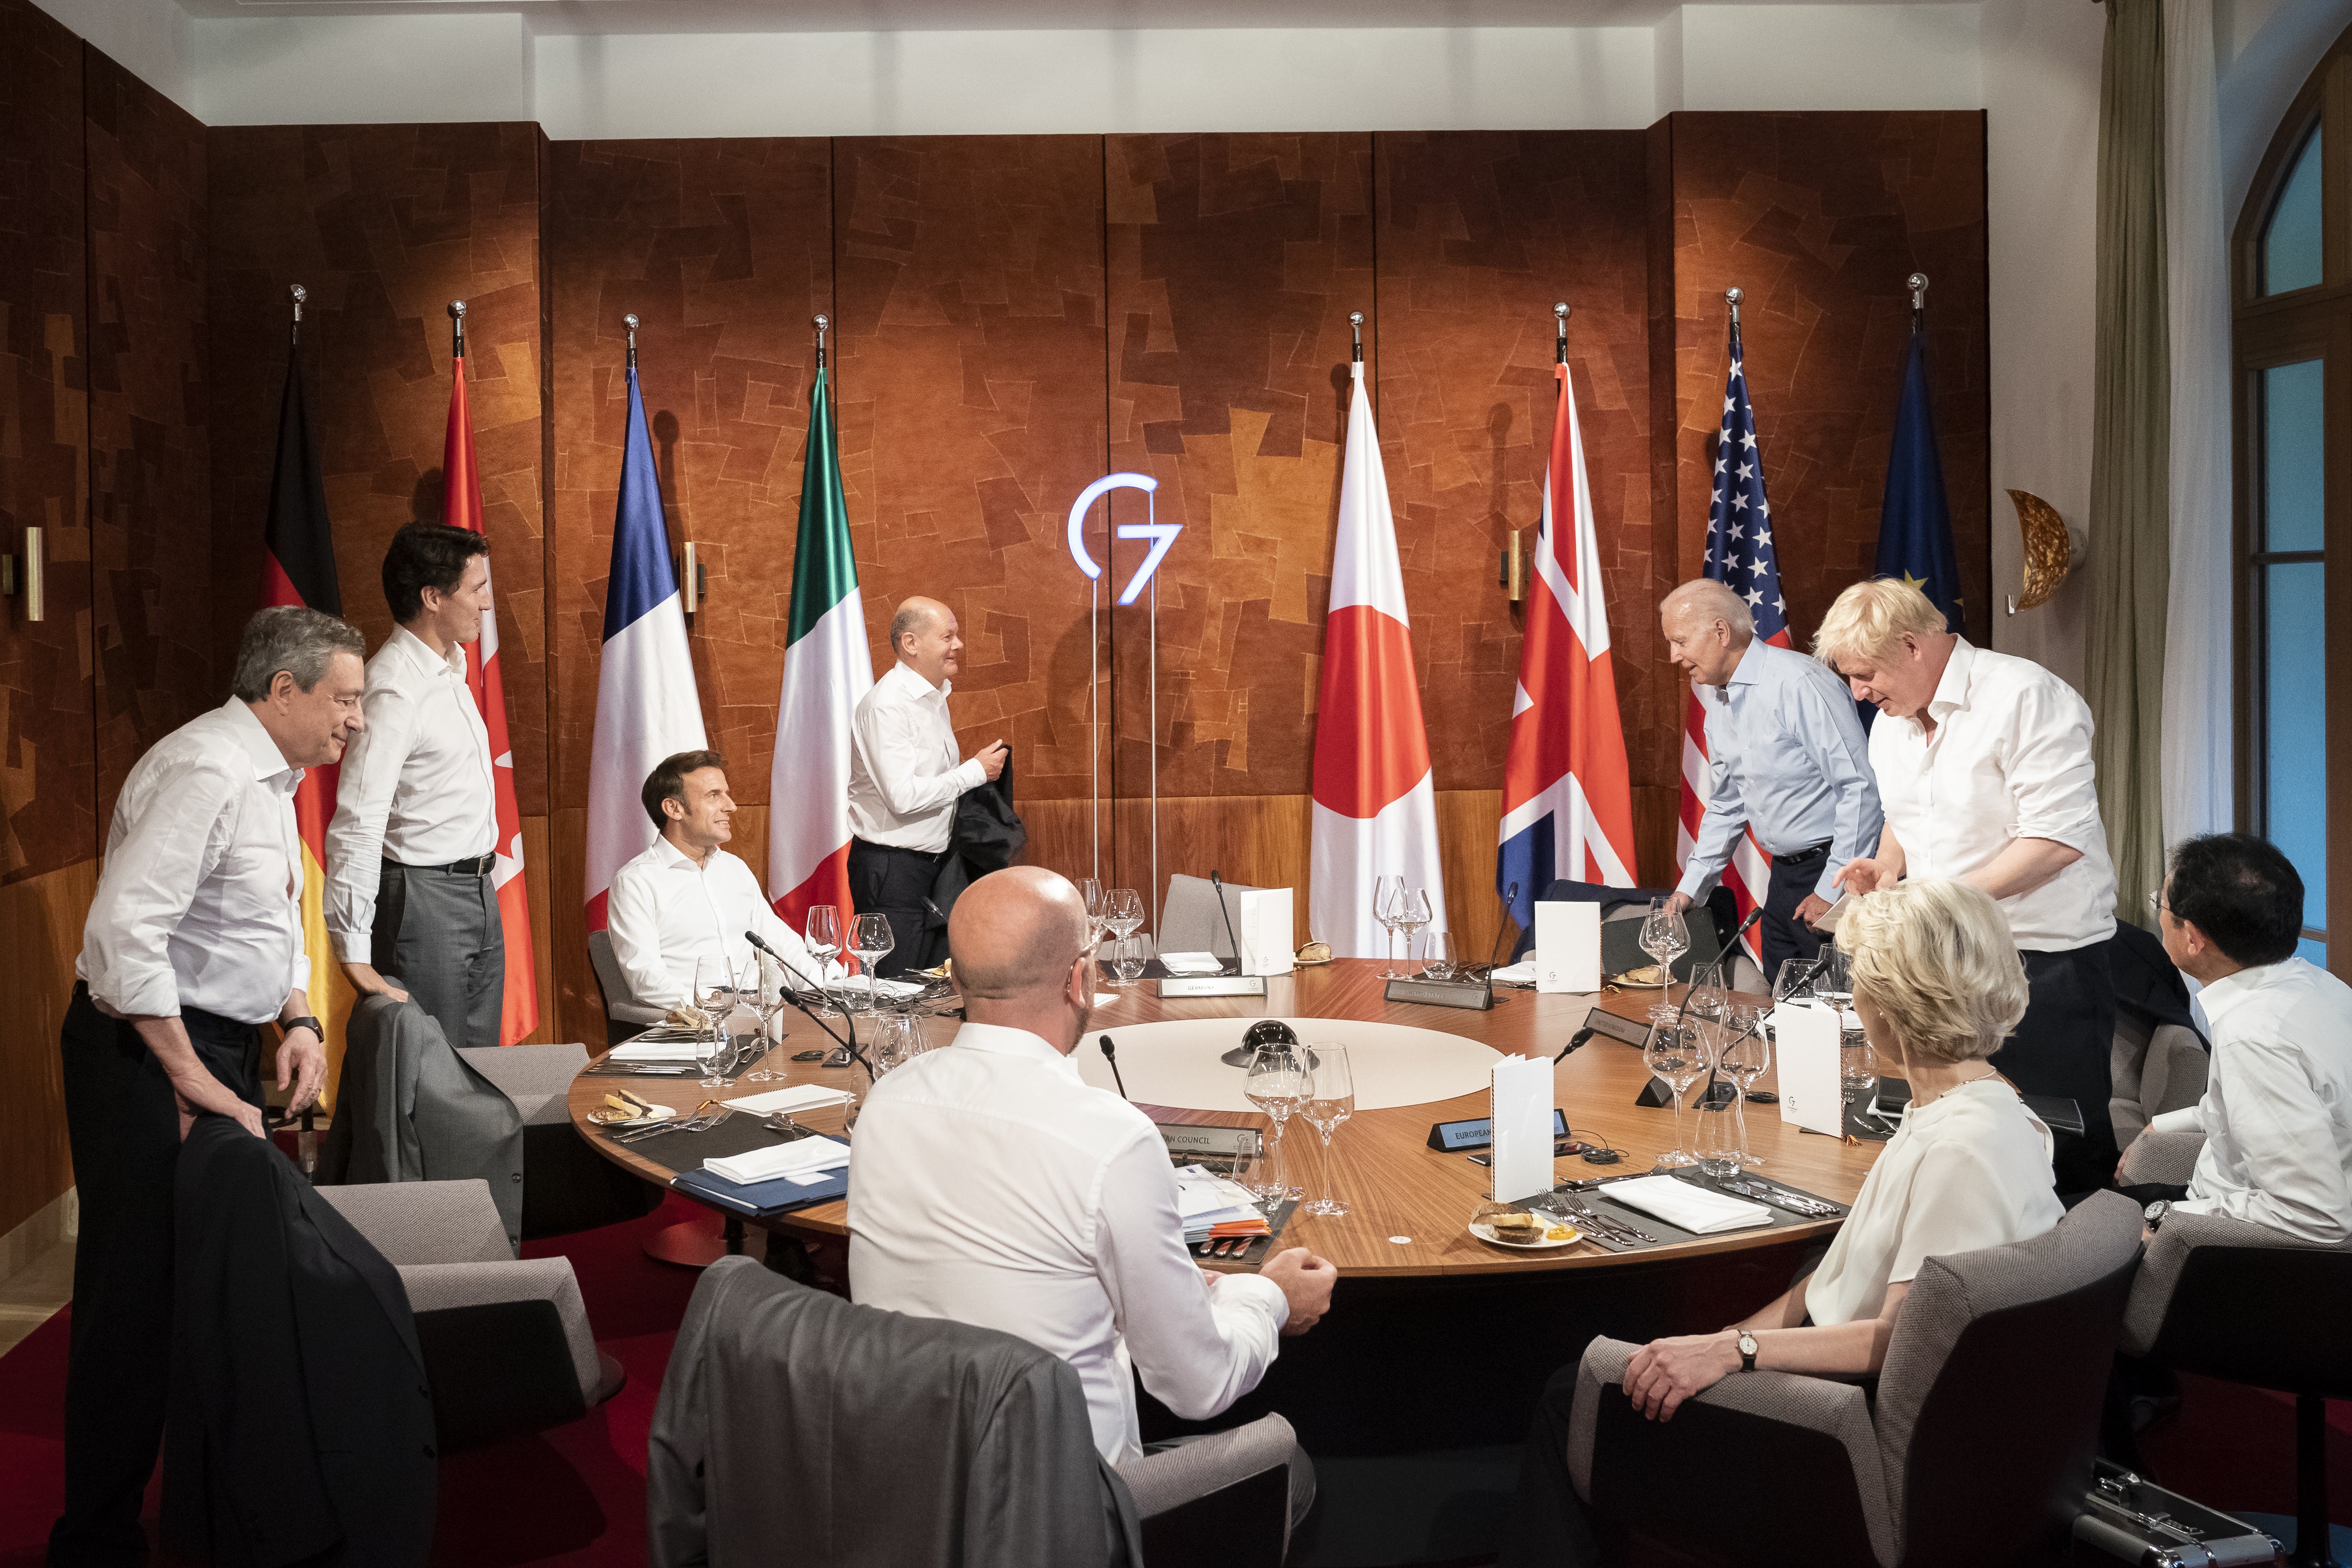 G7 leaders at the summit in Germany